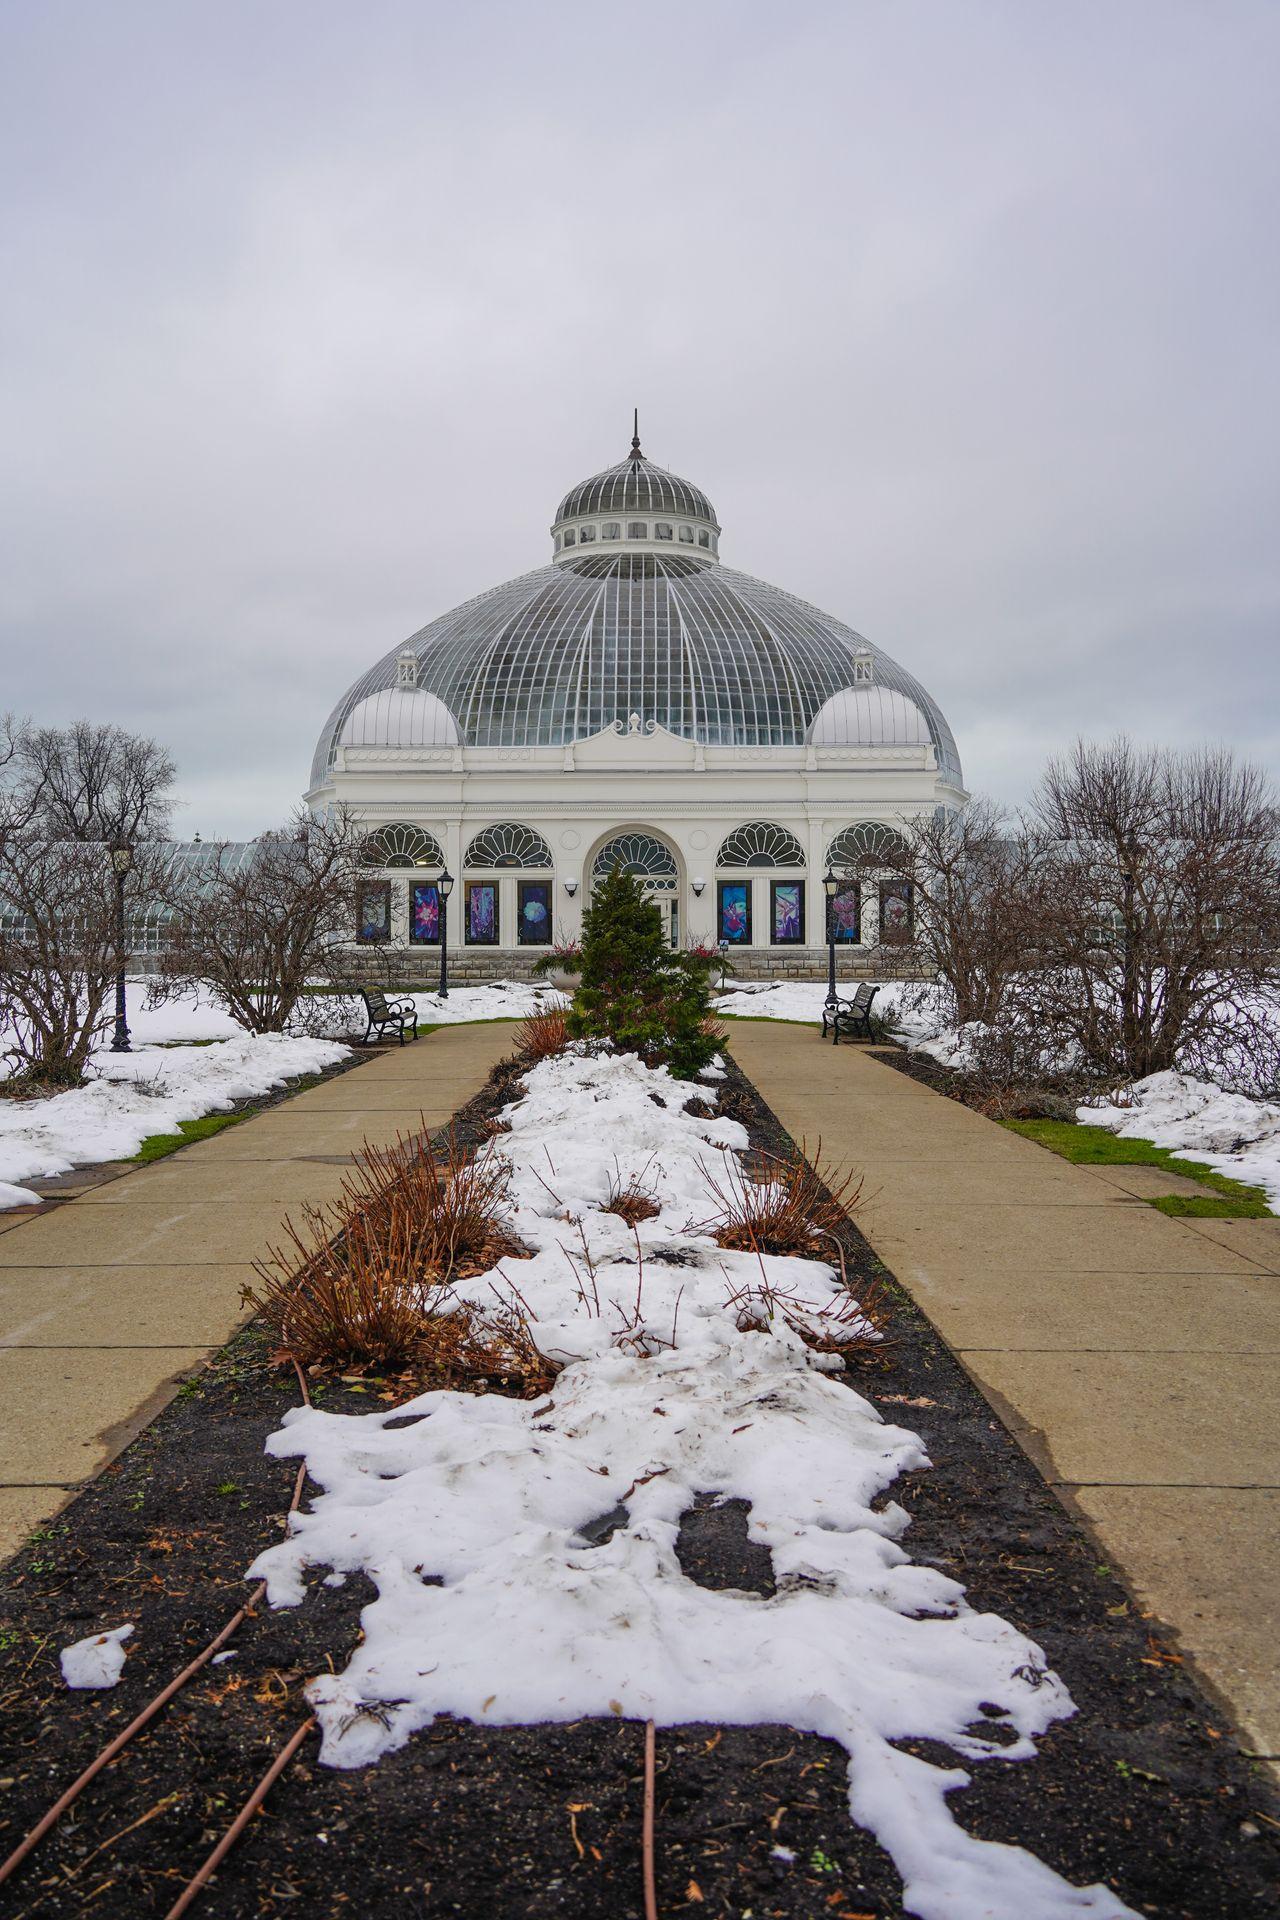 Looking straight at the Buffalo Botanical Gardens builidng, which is a glass greenhouse. There is a bit of snow on the ground on top of the garden beds outside of the building.